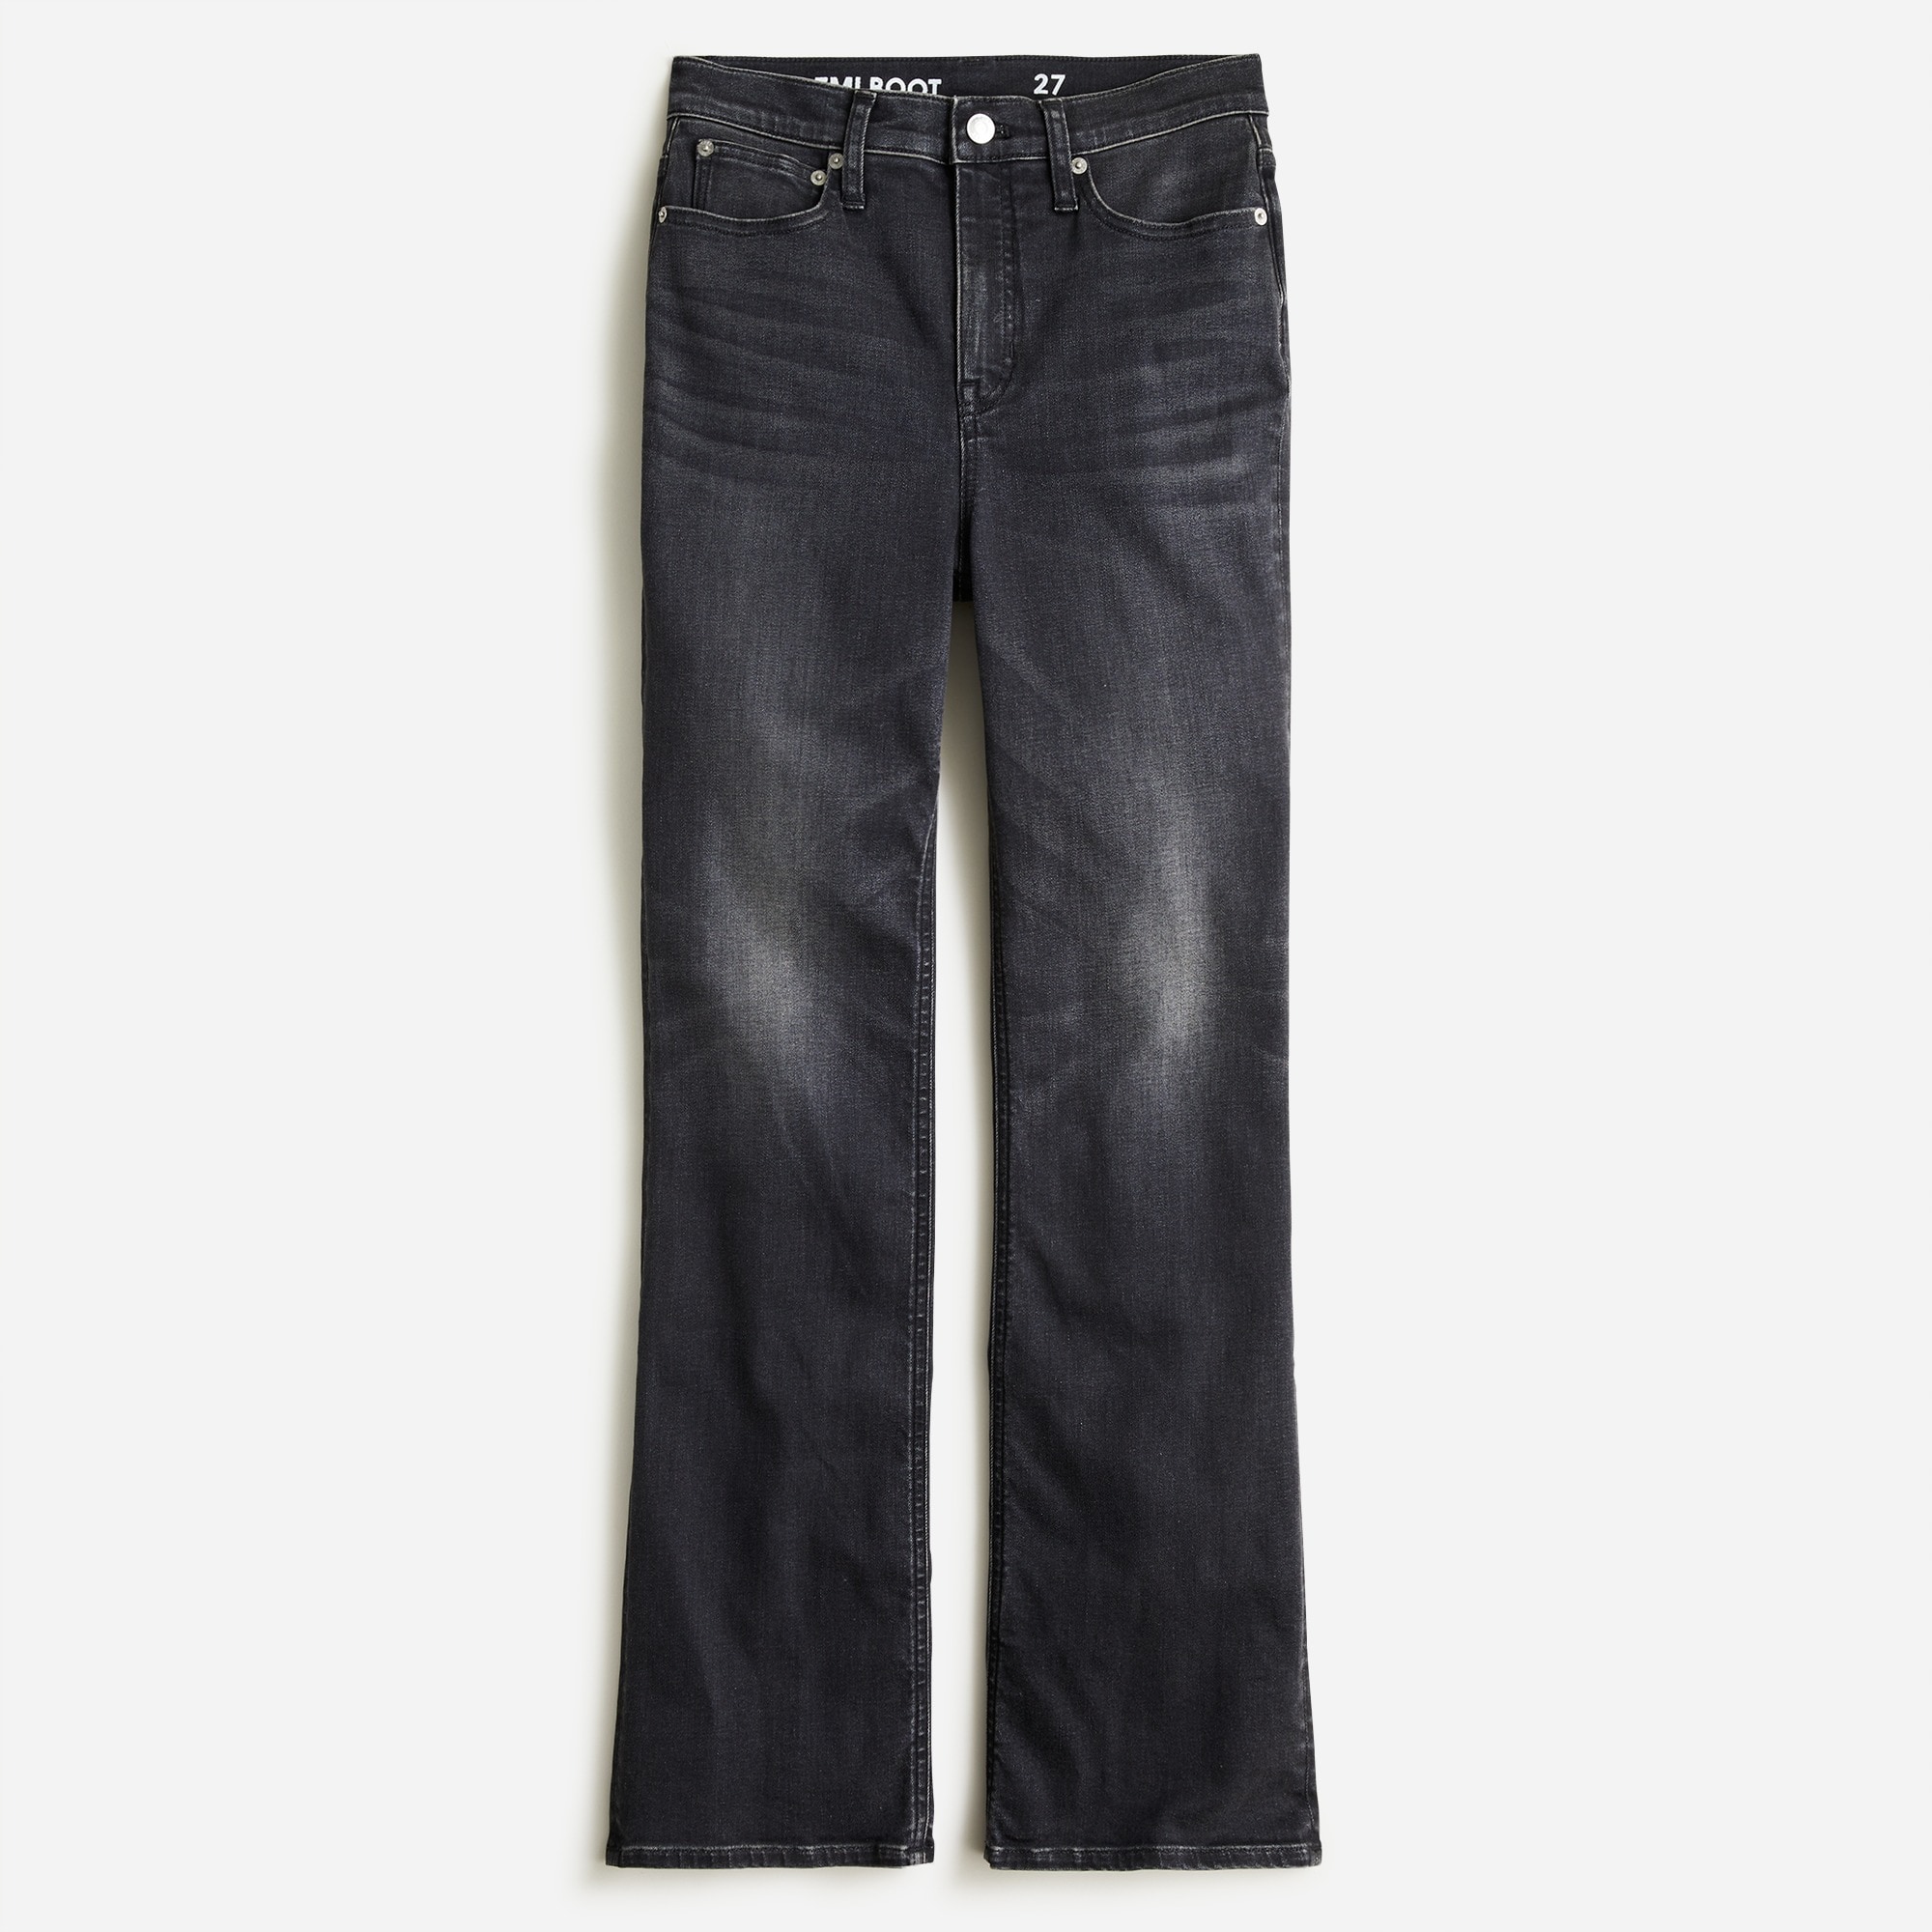 J.Crew: High-rise Slim Demi-boot Jean In Charcoal Wash For Women